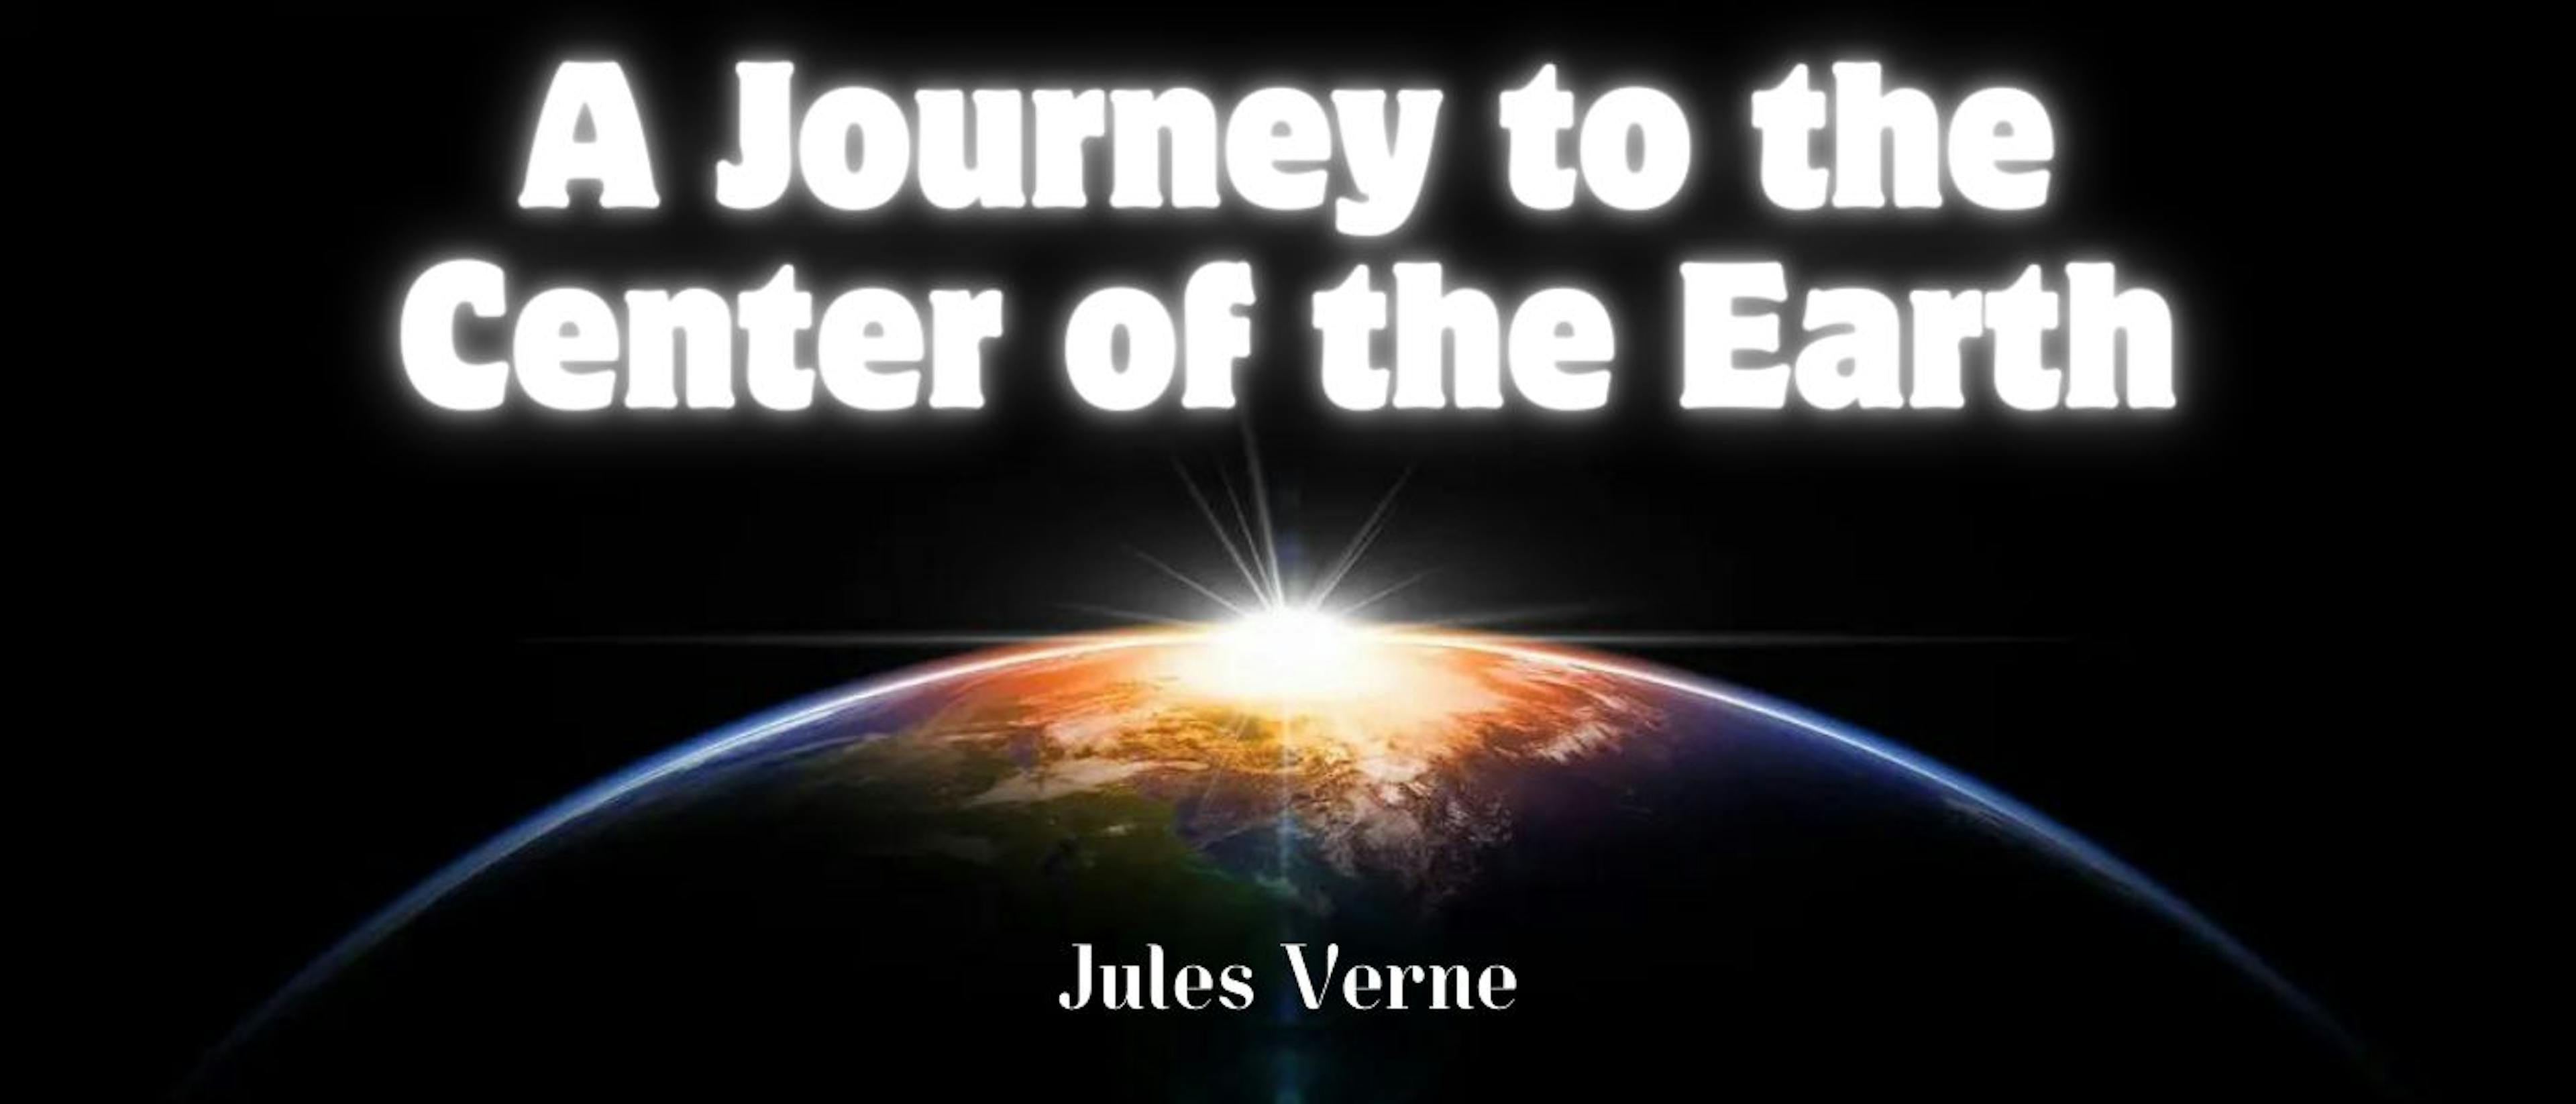 featured image - A Journey to the Center of the Earth by Jules Verne - Table of Links